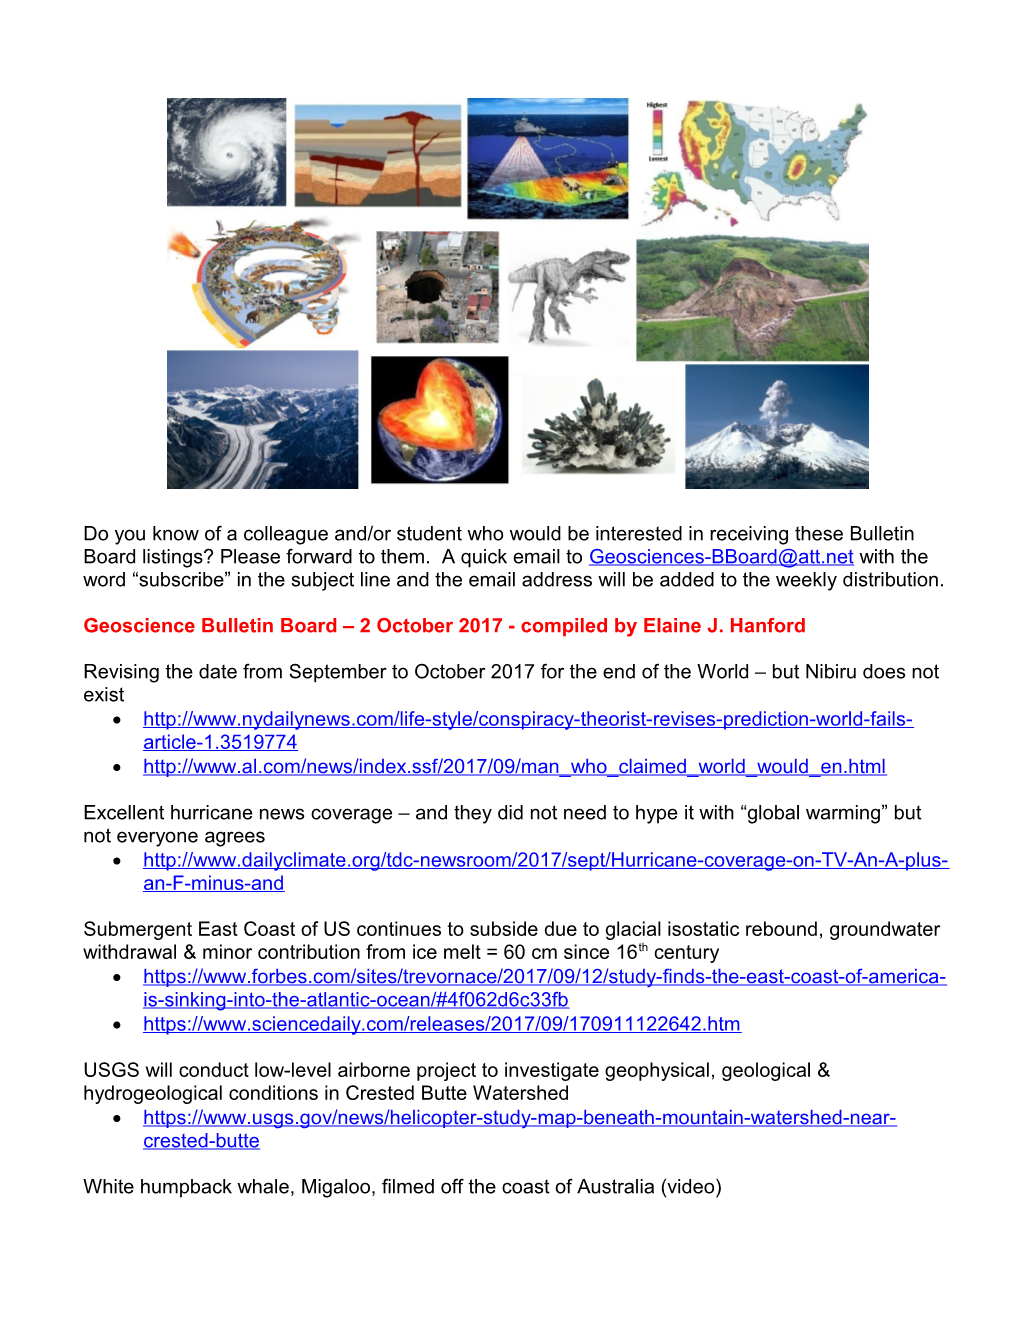 Geoscience Bulletin Board 2 October 2017- Compiled by Elaine J. Hanford